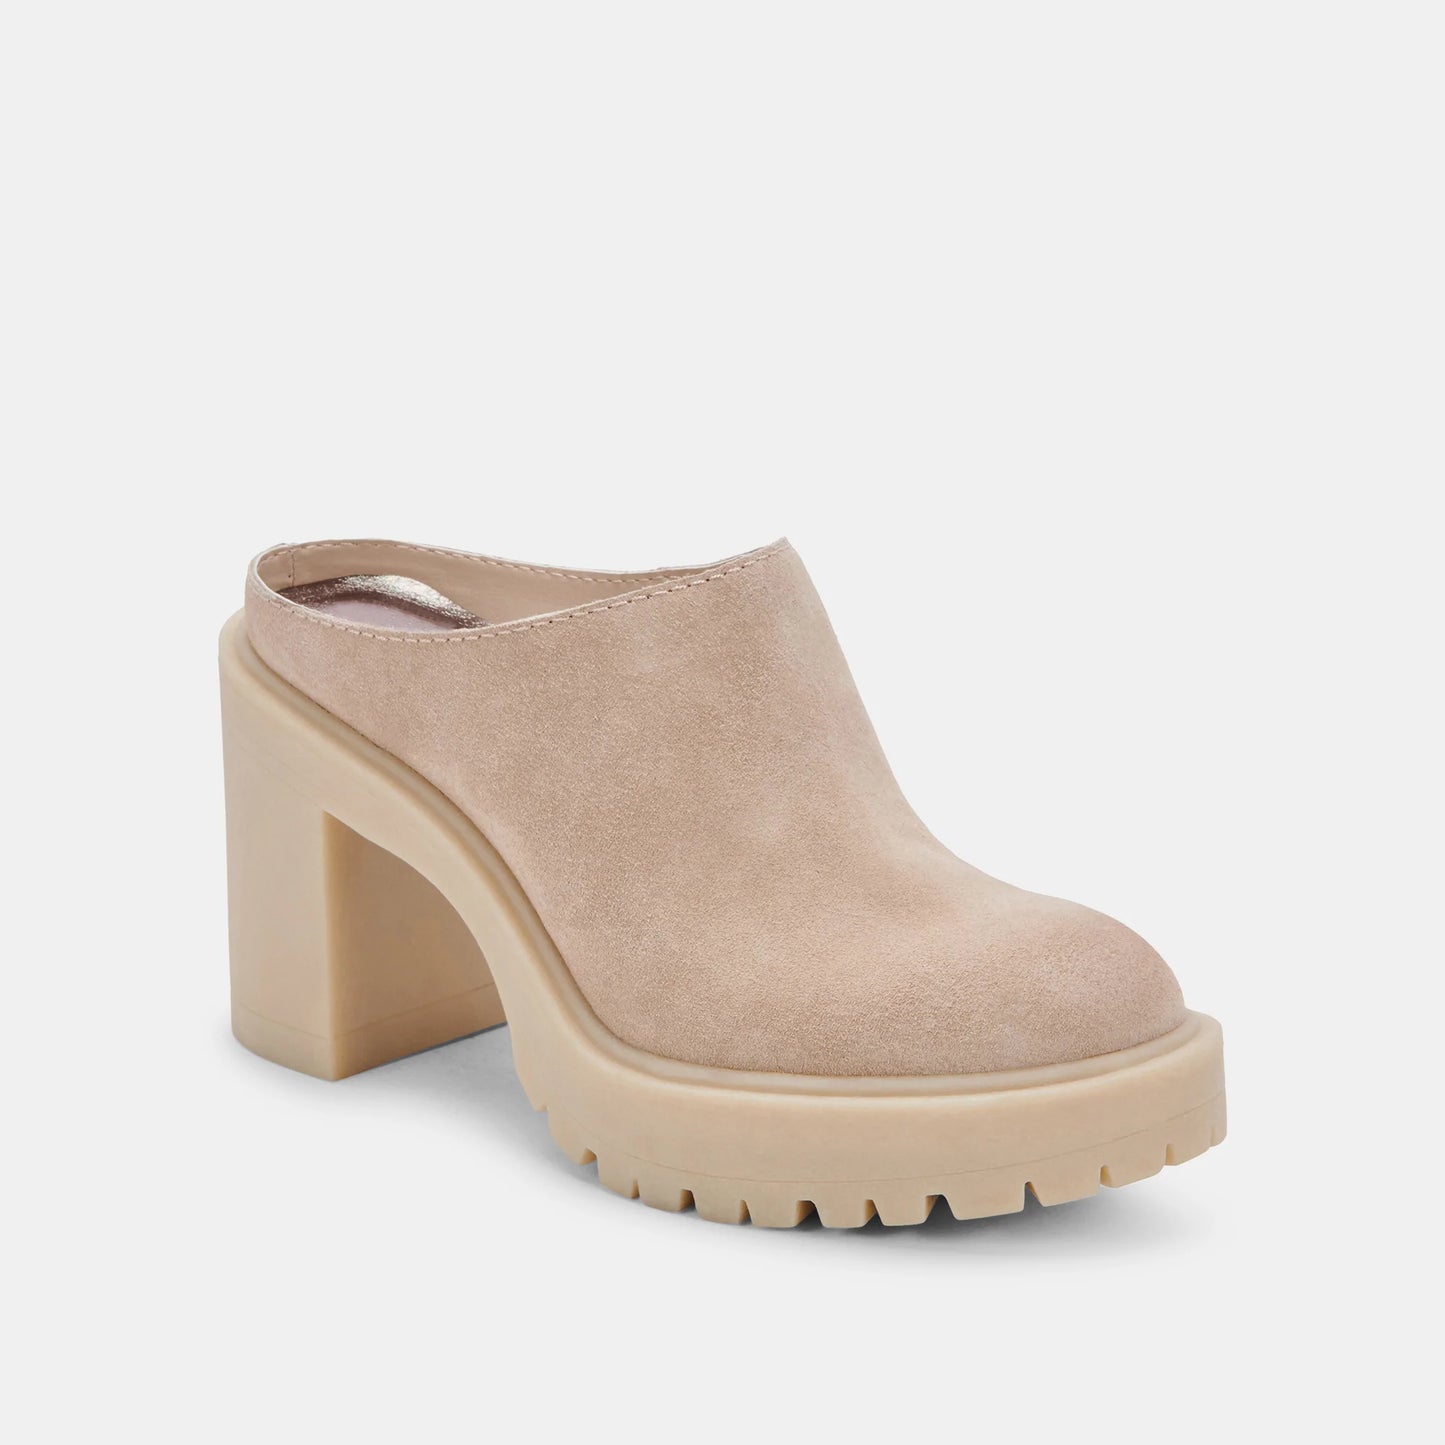 Load image into Gallery viewer, Dolce Vita Carry Heels - Dune Suede
